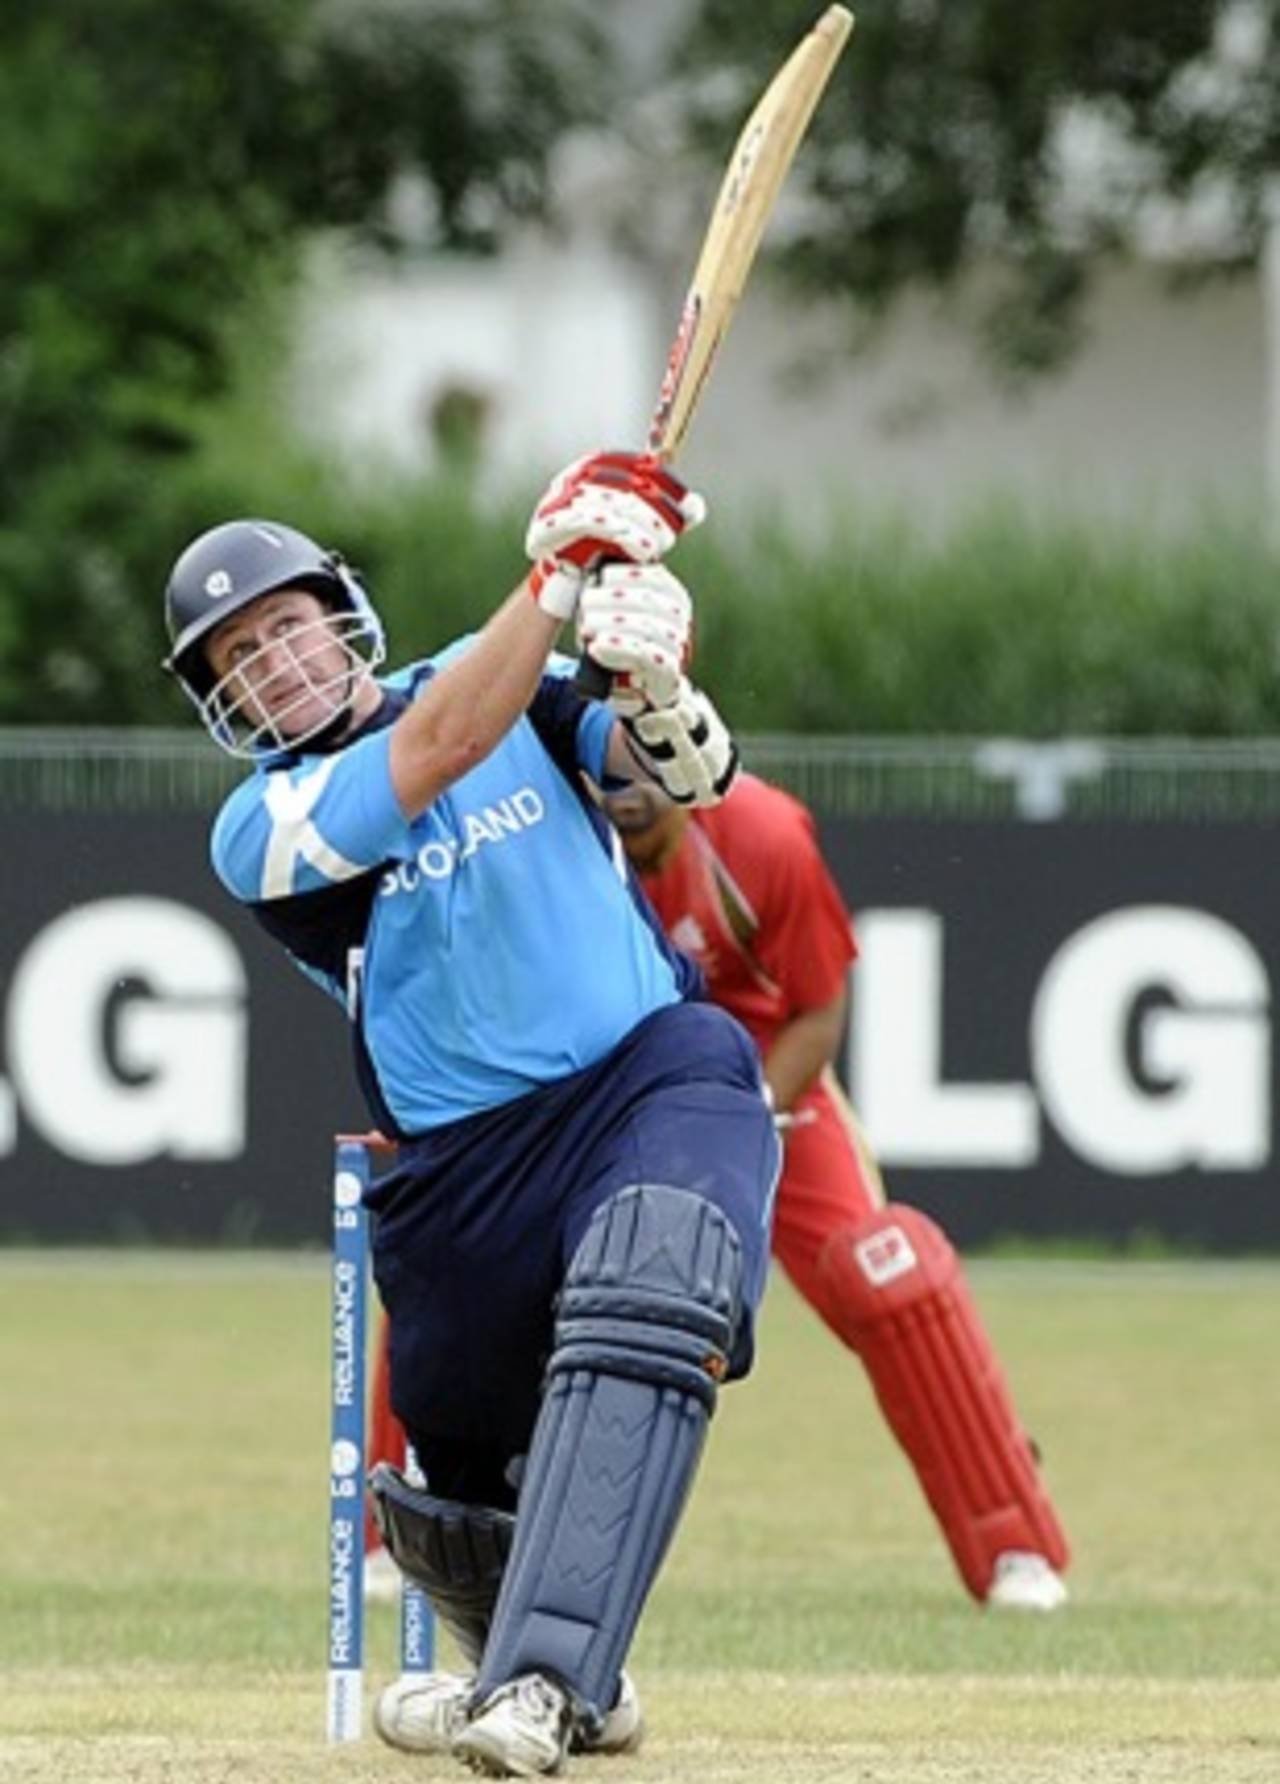 Neil McCallum became Scotland's most-capped player and starred with a half-century&nbsp;&nbsp;&bull;&nbsp;&nbsp;International Cricket Council